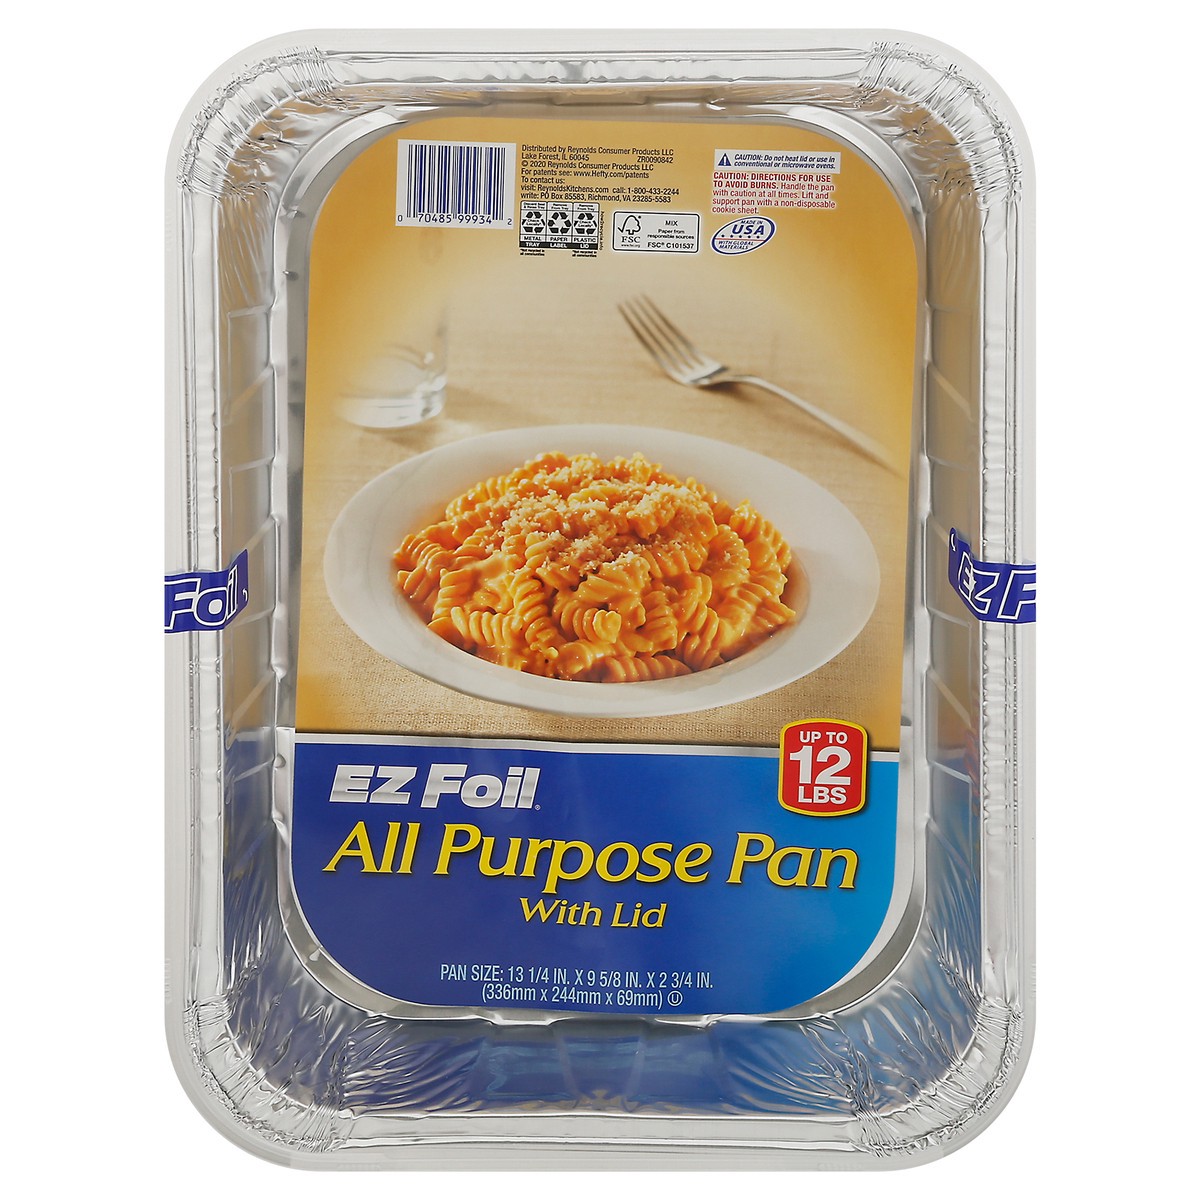 slide 1 of 12, EZ Foil All Purpose Pan with Cover, 4 ct